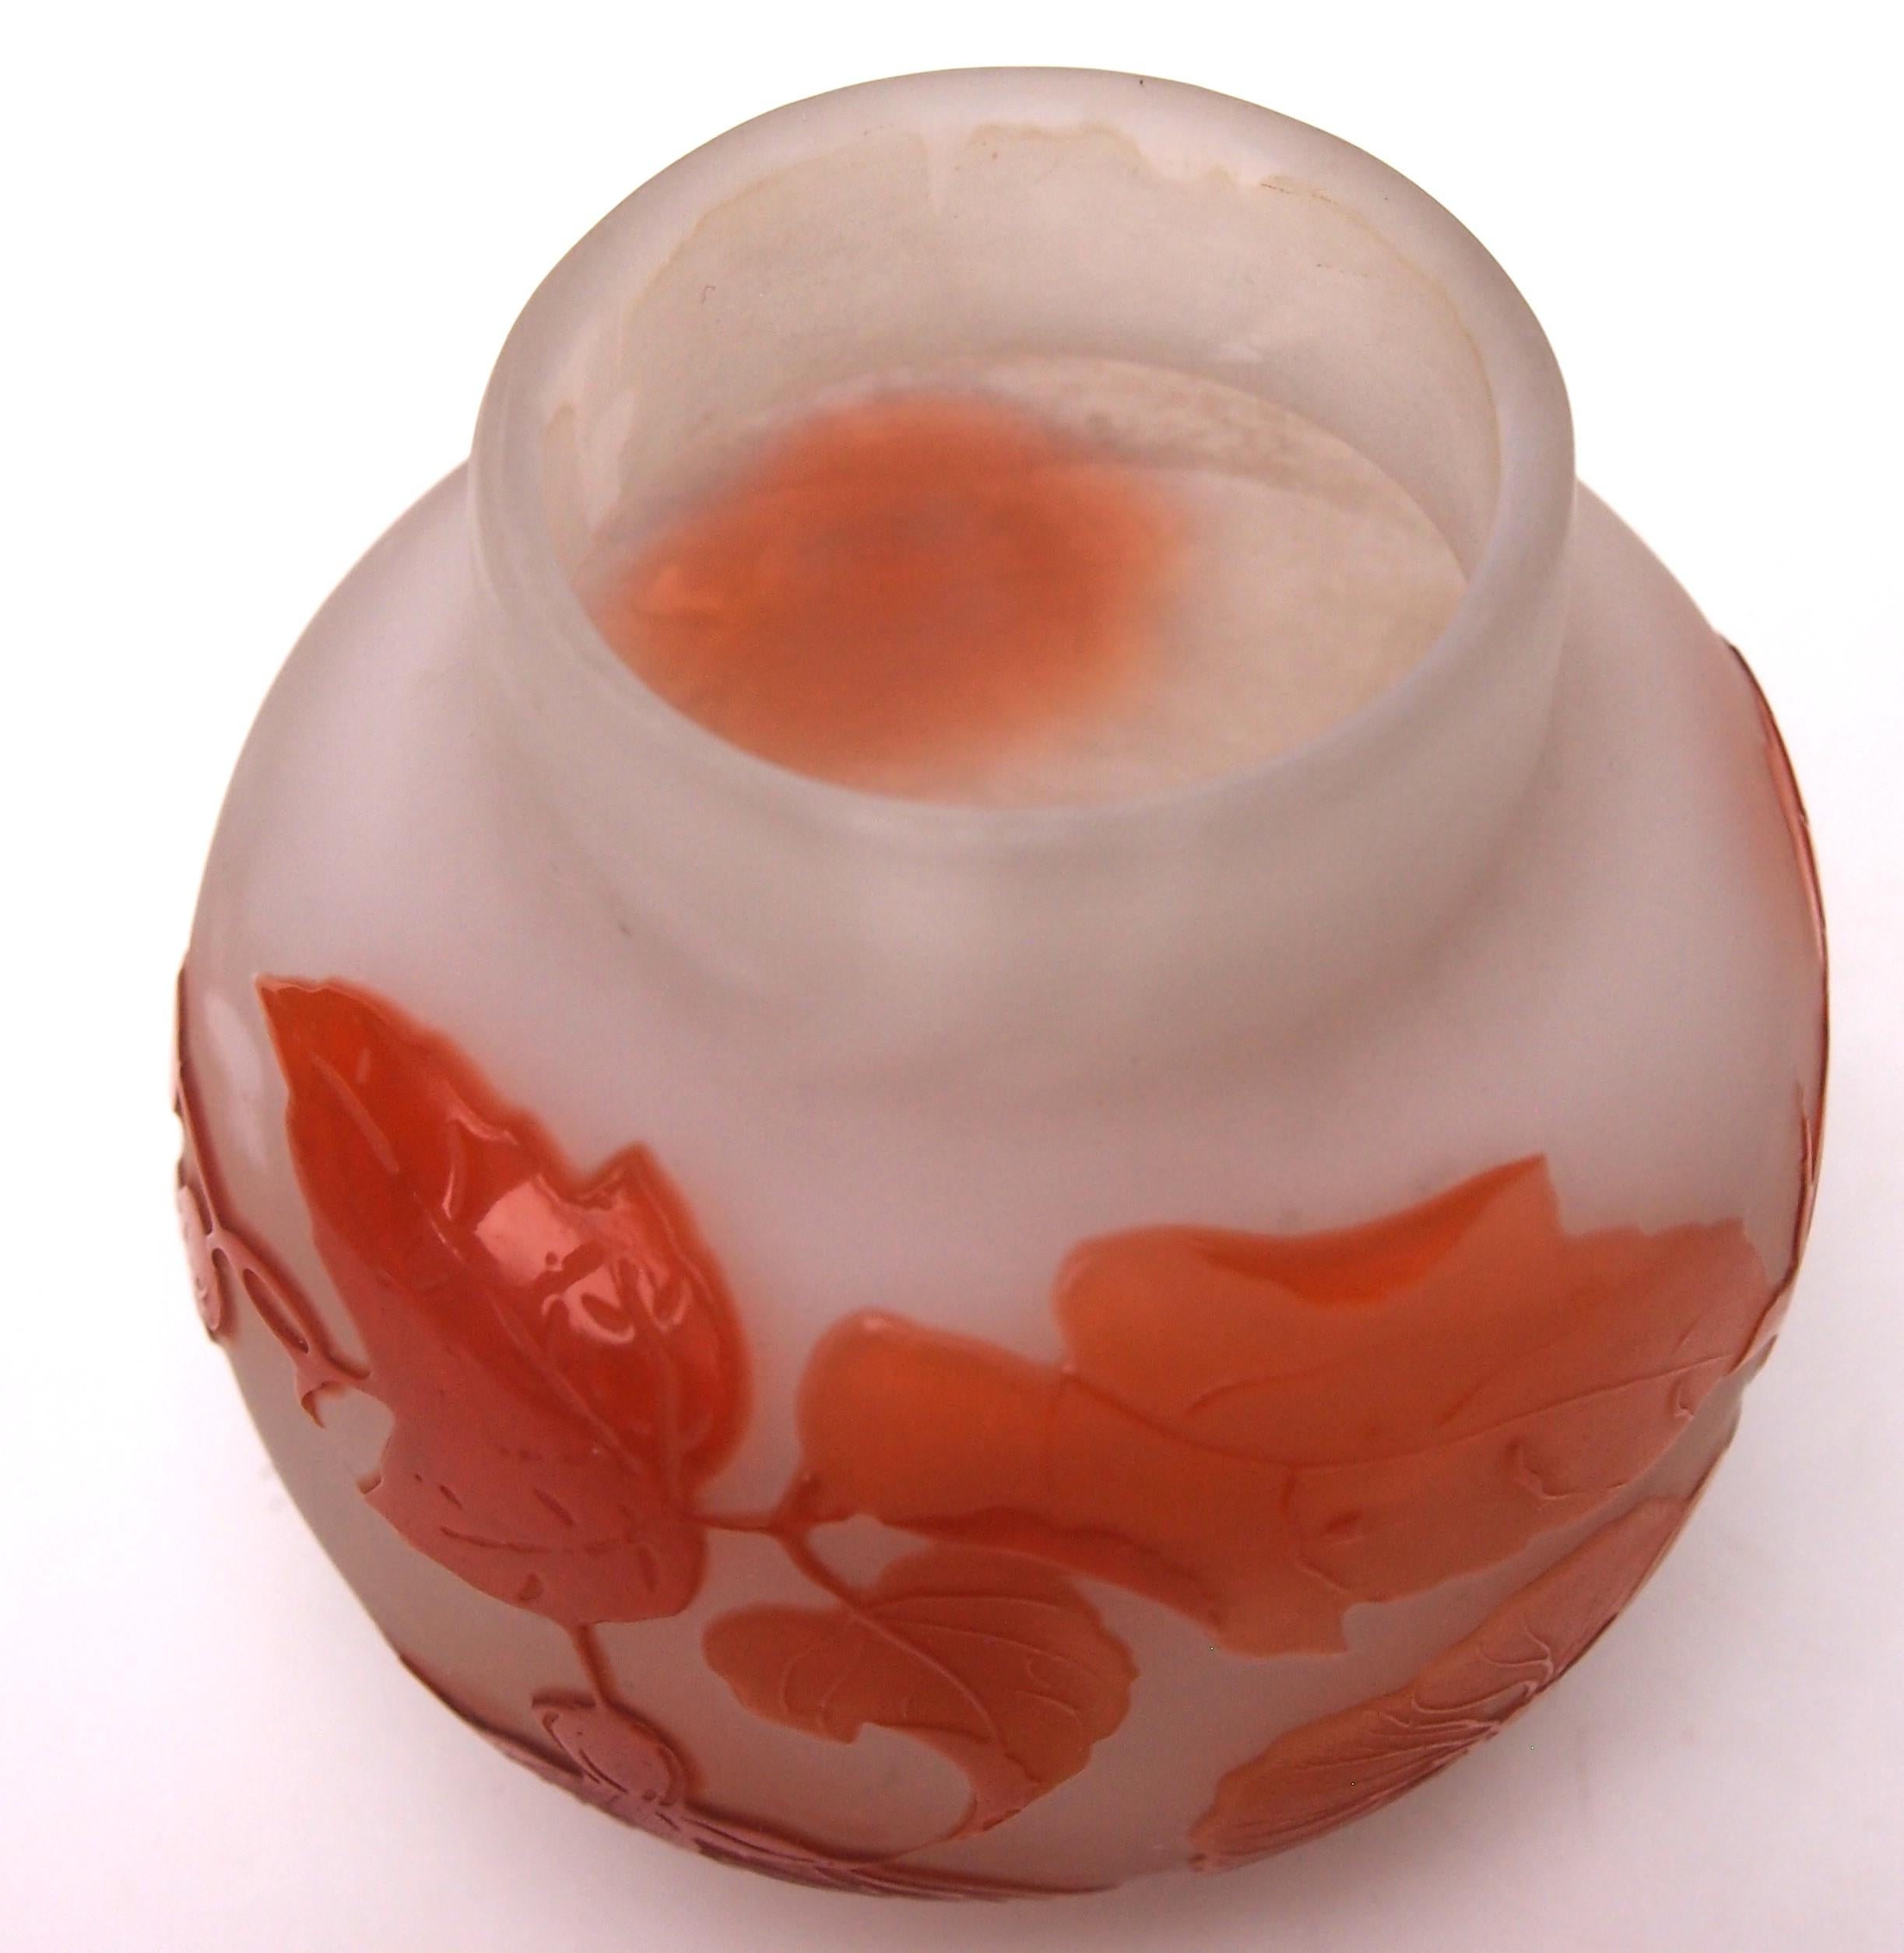 Art Glass Striking Early French Art Nouveau Emile Galle Botanical Cameo Glass Vase -c1900 For Sale